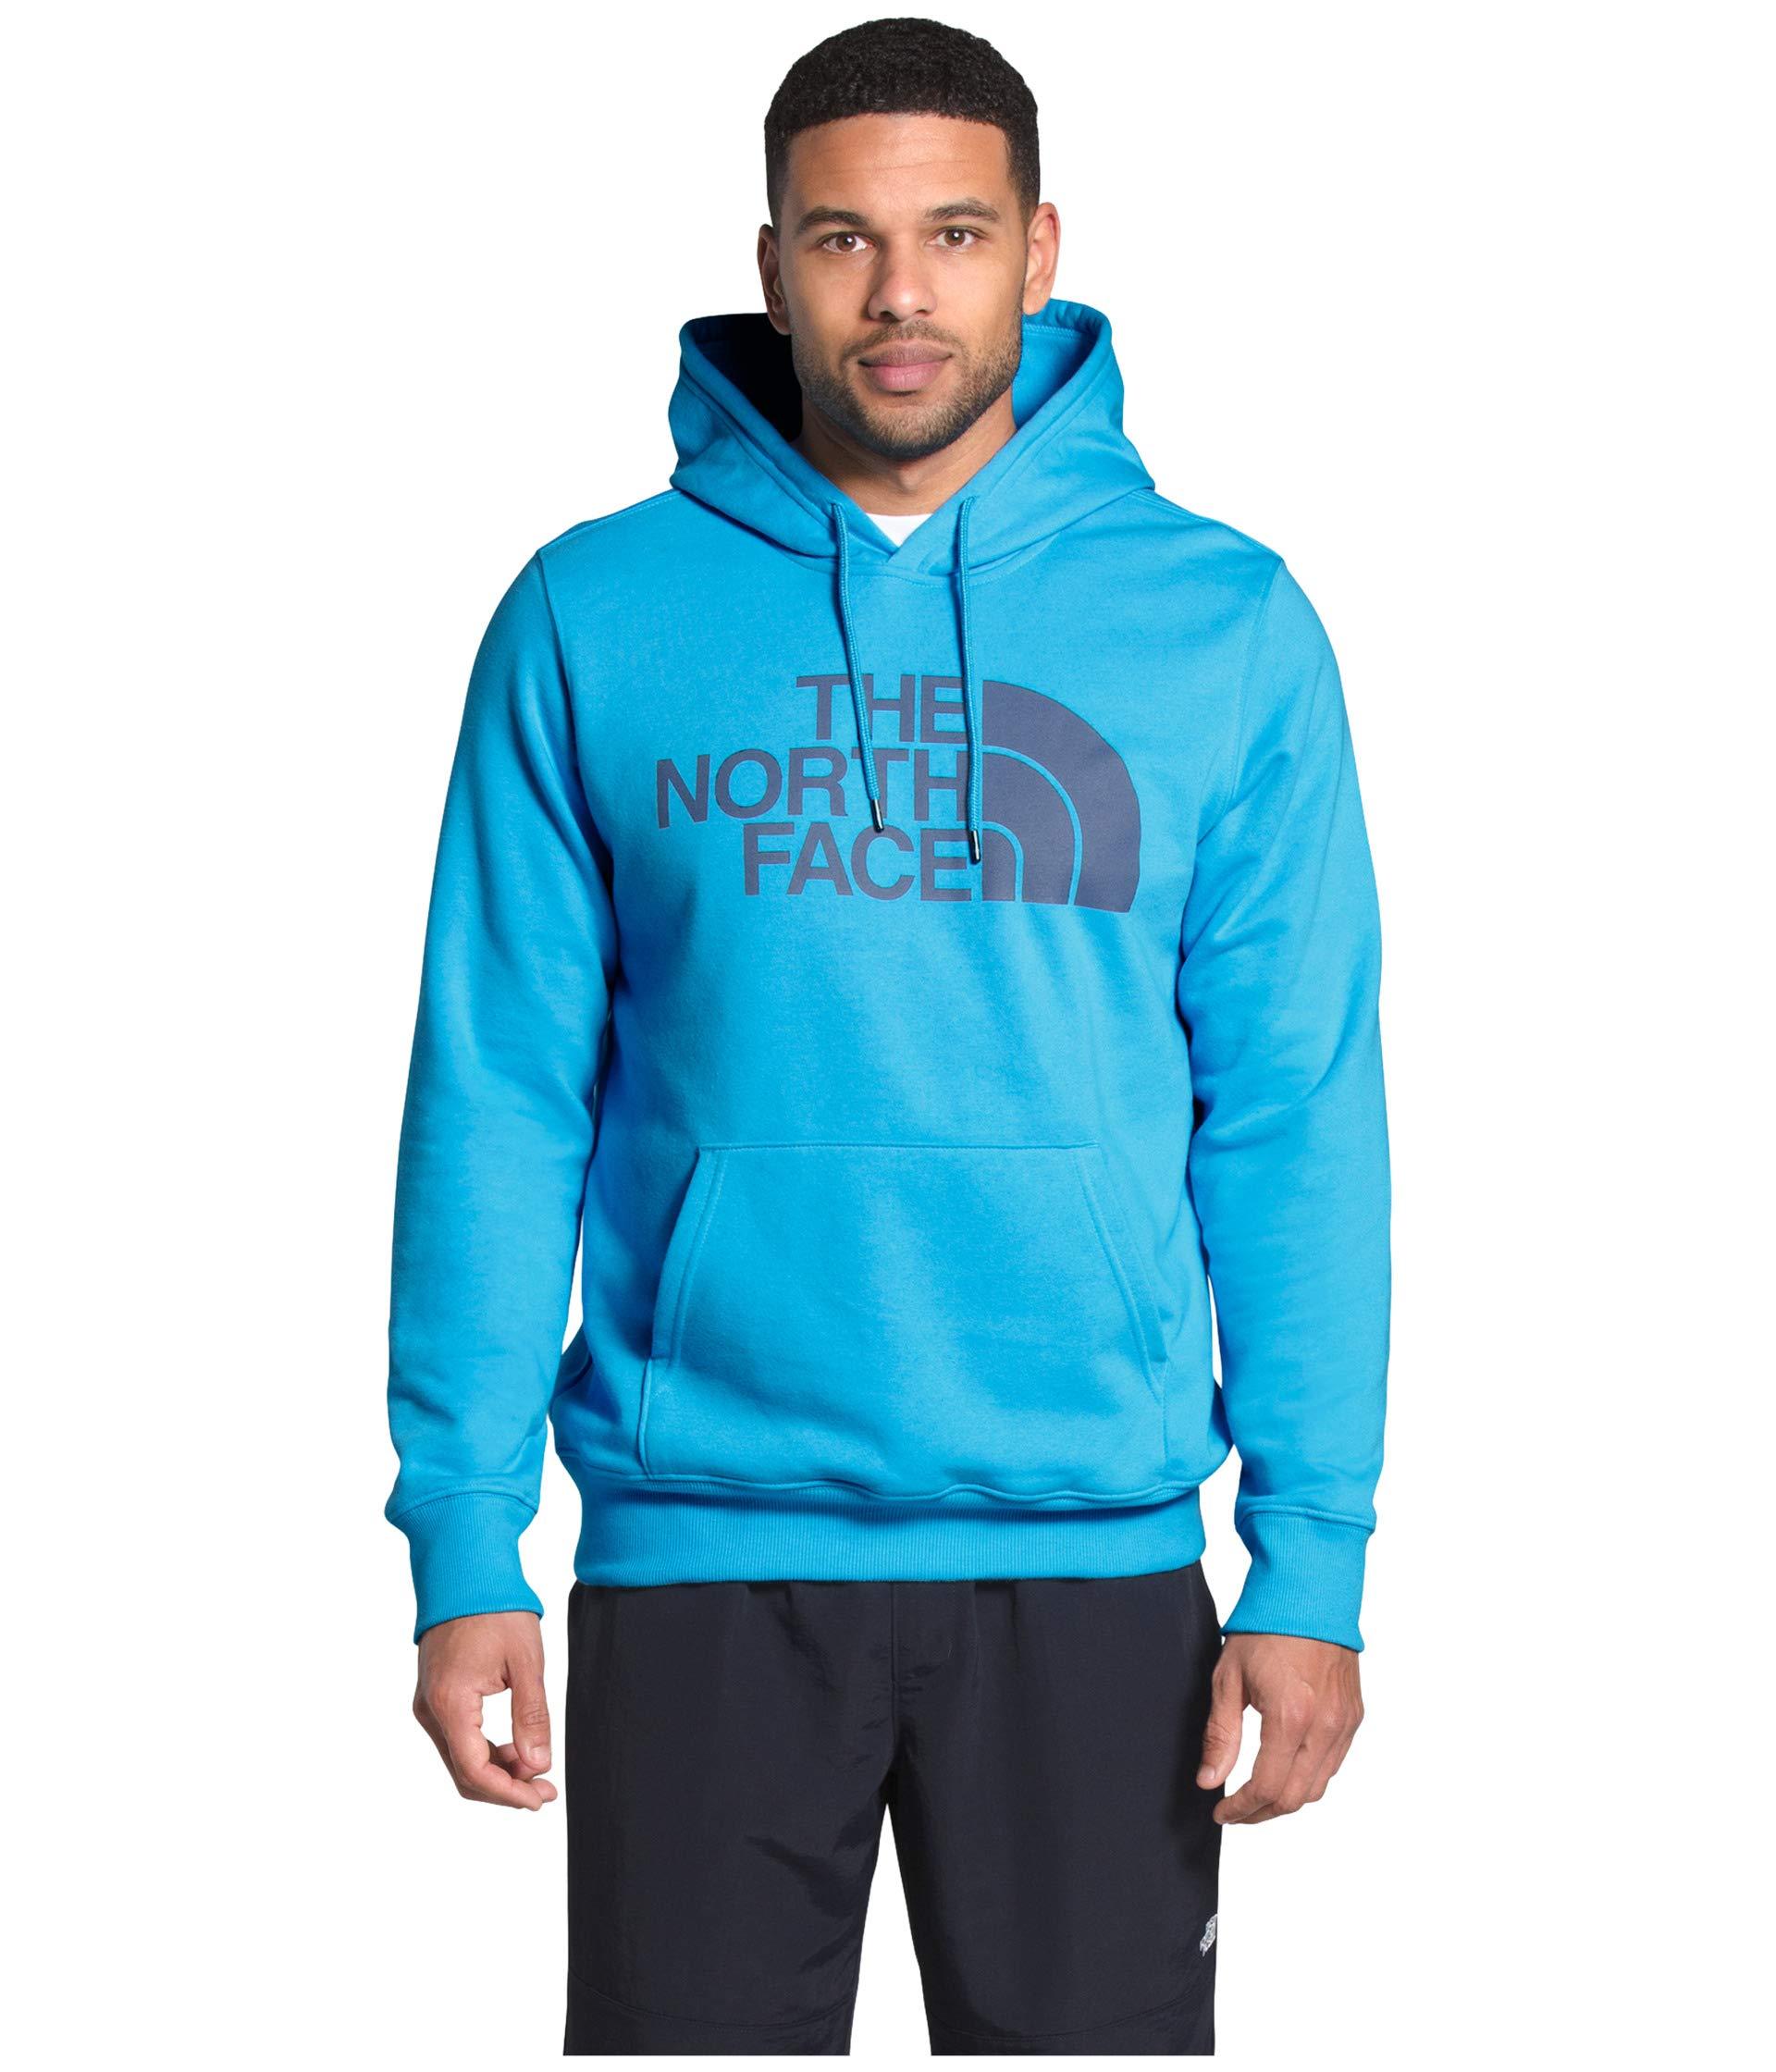 The North Face Cotton Half Dome Pullover Hoodie in Blue for Men - Lyst